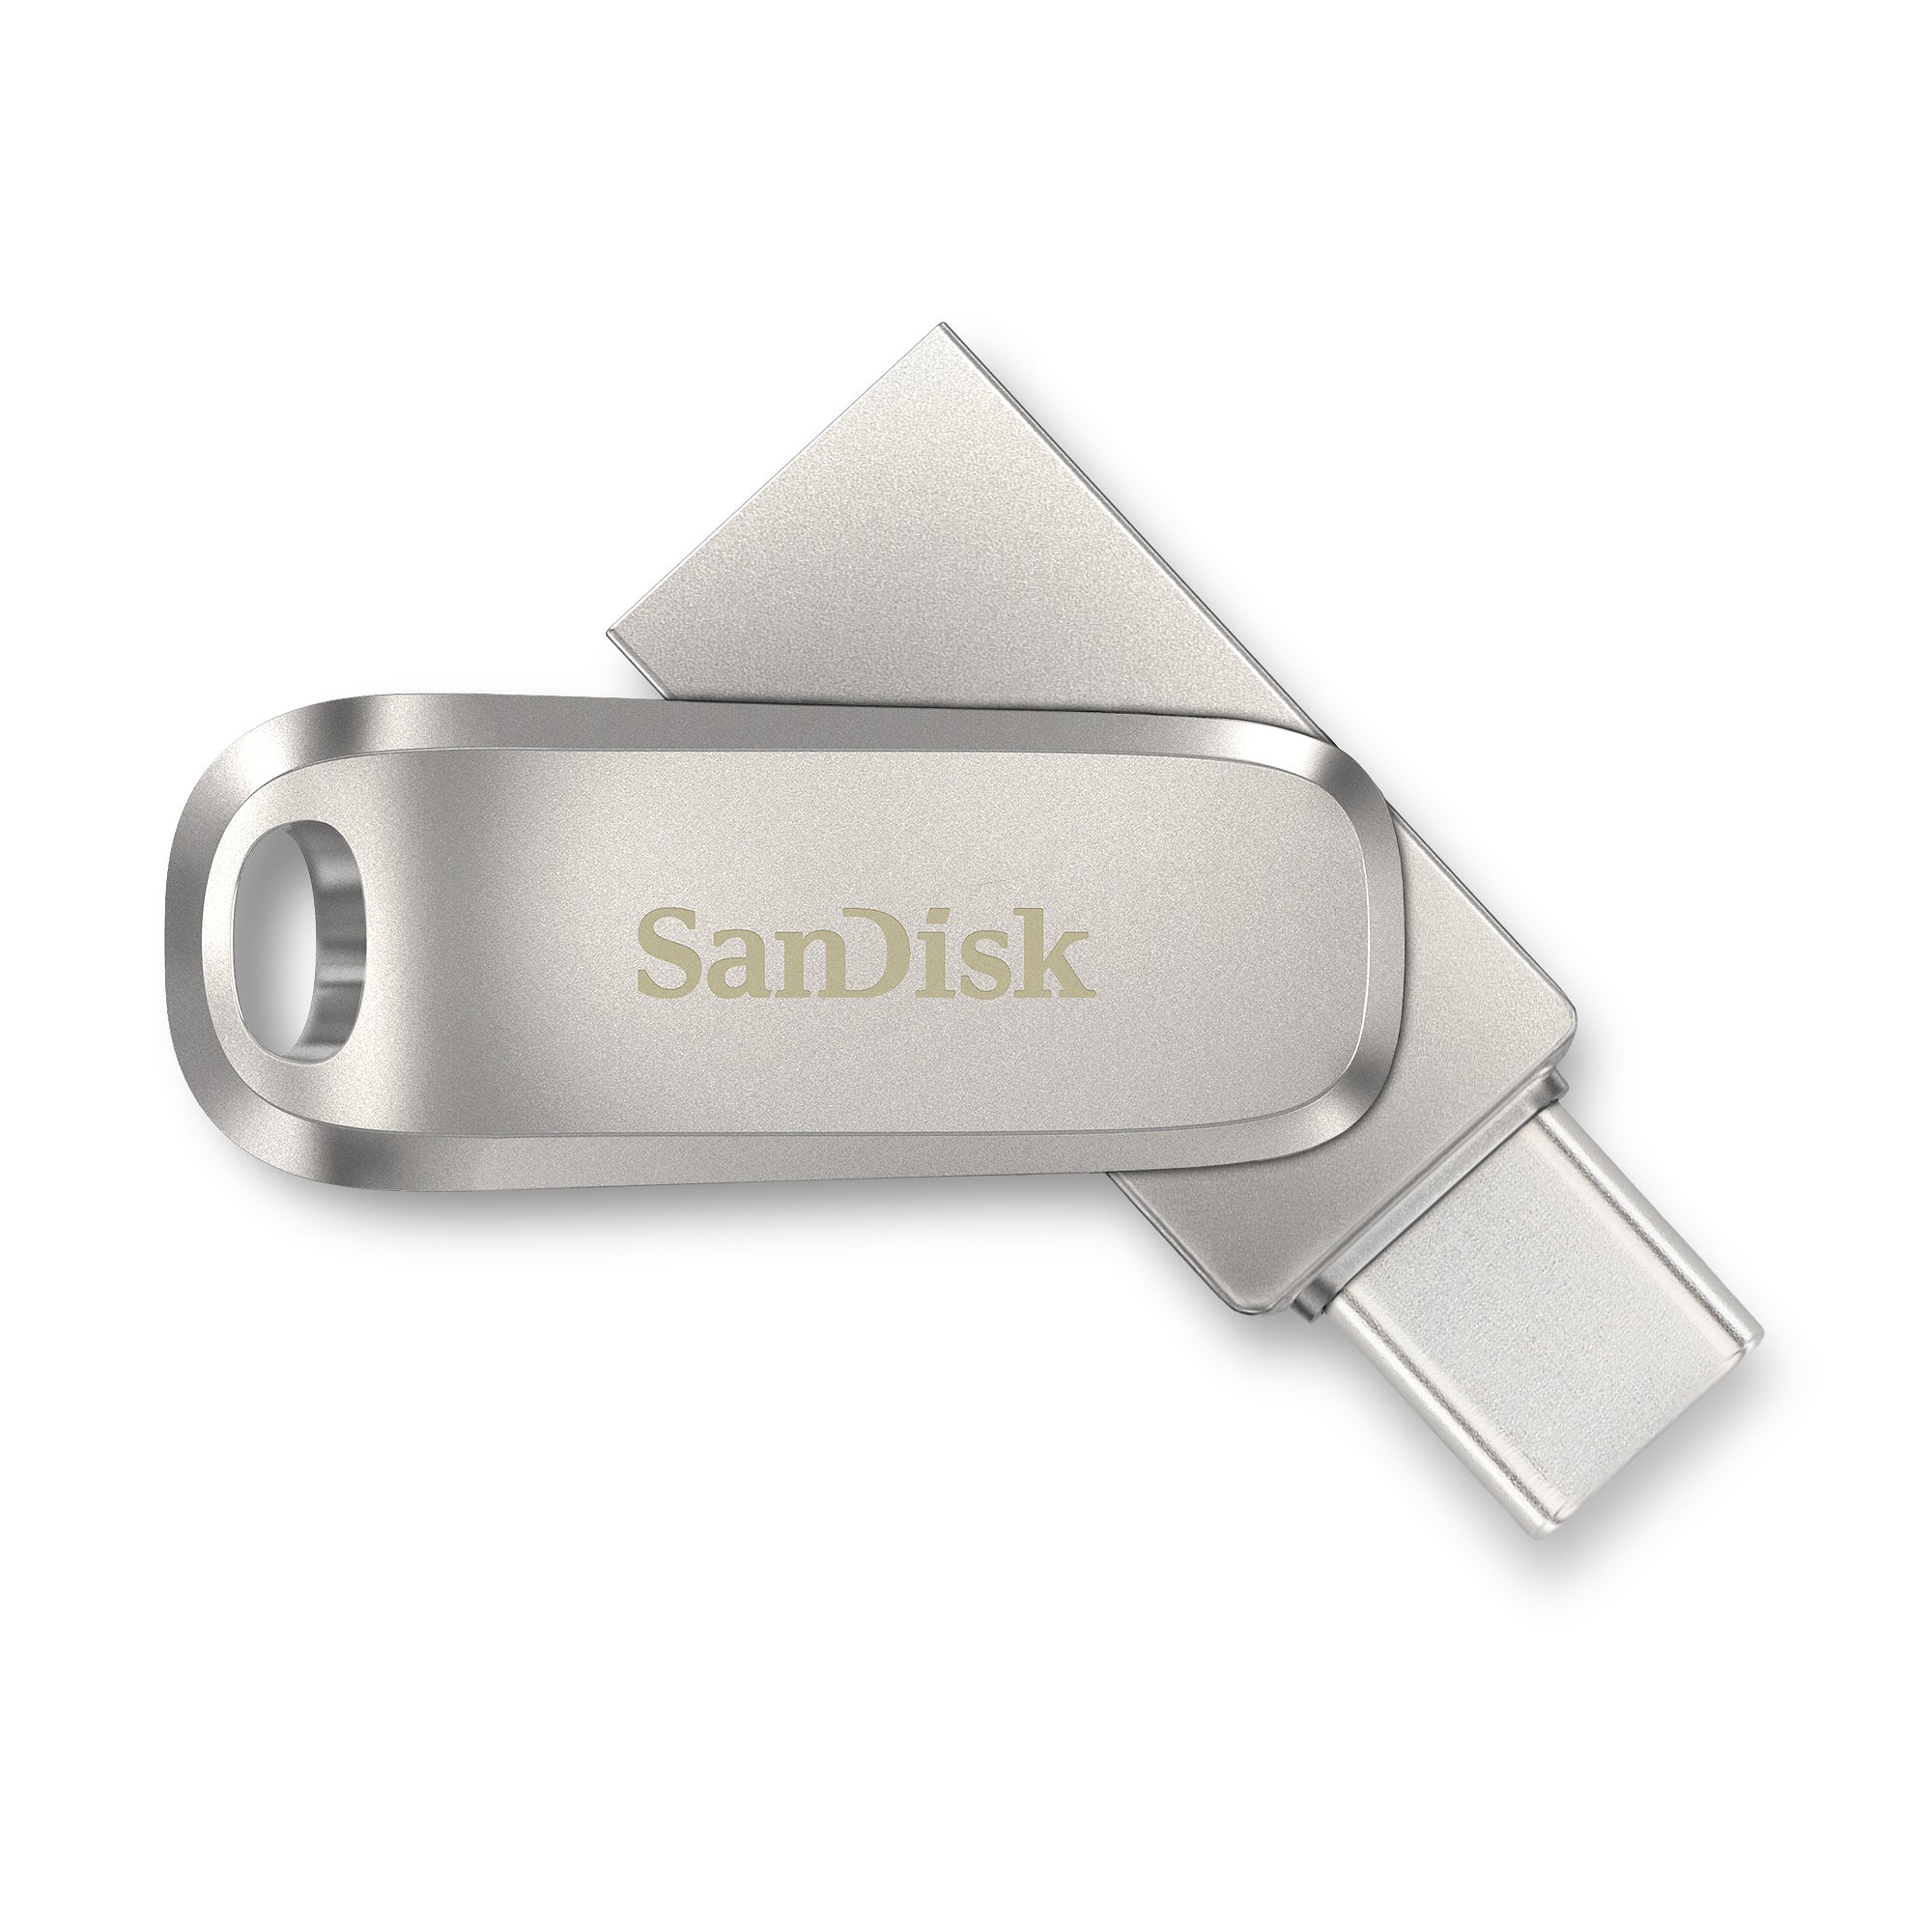 SanDisk Ultra Dual Drive Luxe USB Type C Flash Drive 2 in 1 Connector USB 3.1 Gen 1 Speed 150MB/s** 64GB 128GB 256GB 512GB 5 Years Warranty